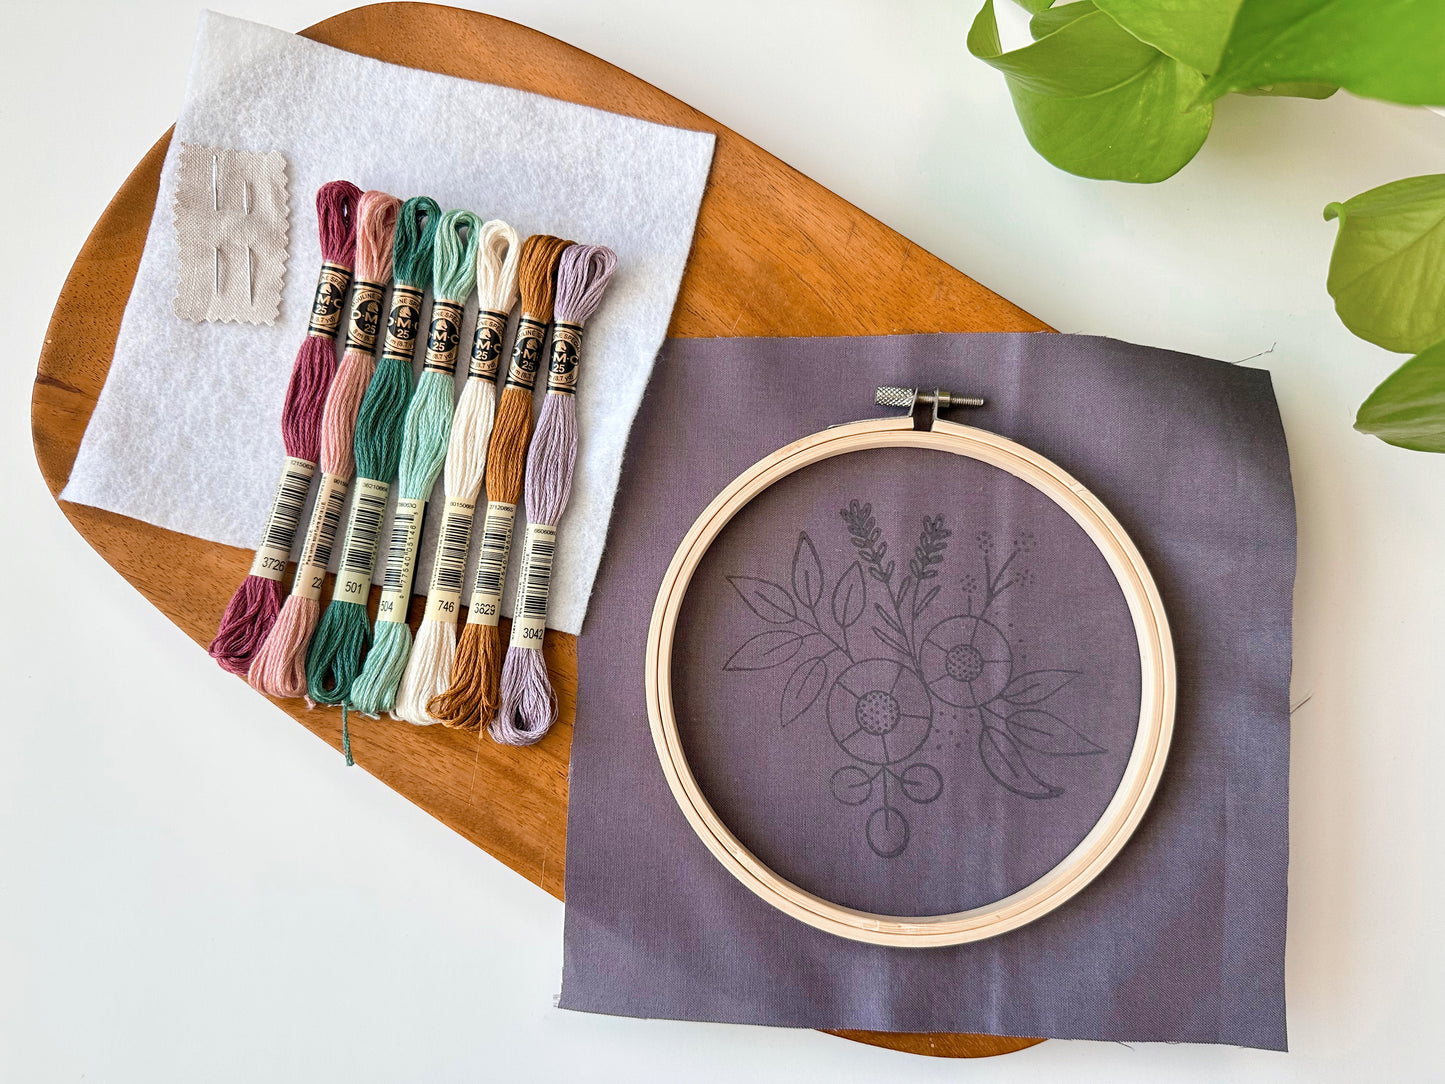 Dreamy Florals Embroidery Kit